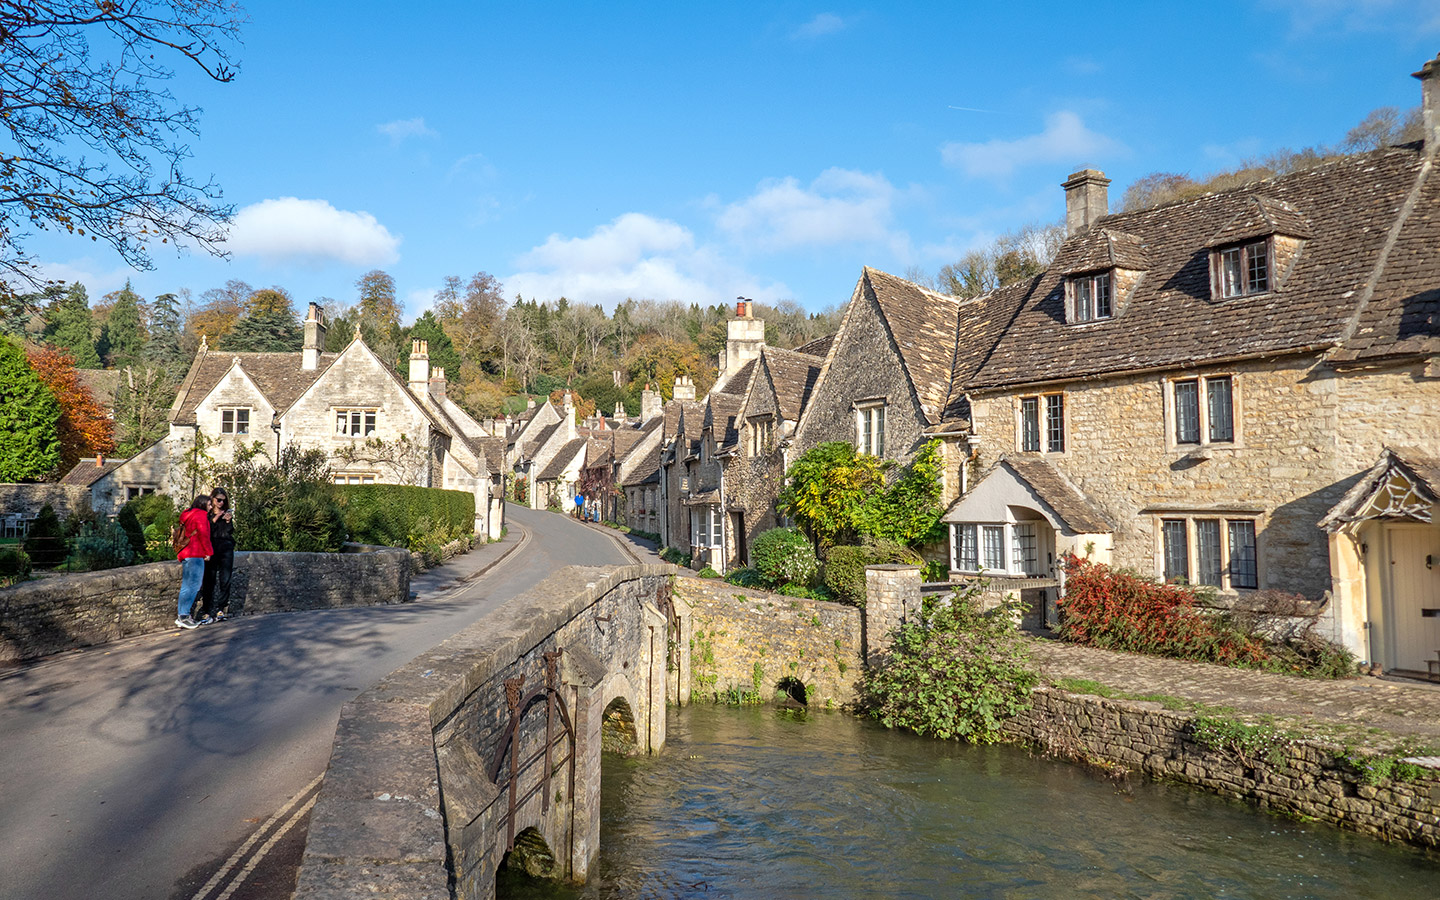 Packhorse bridge in Castle Combe in the Cotswolds